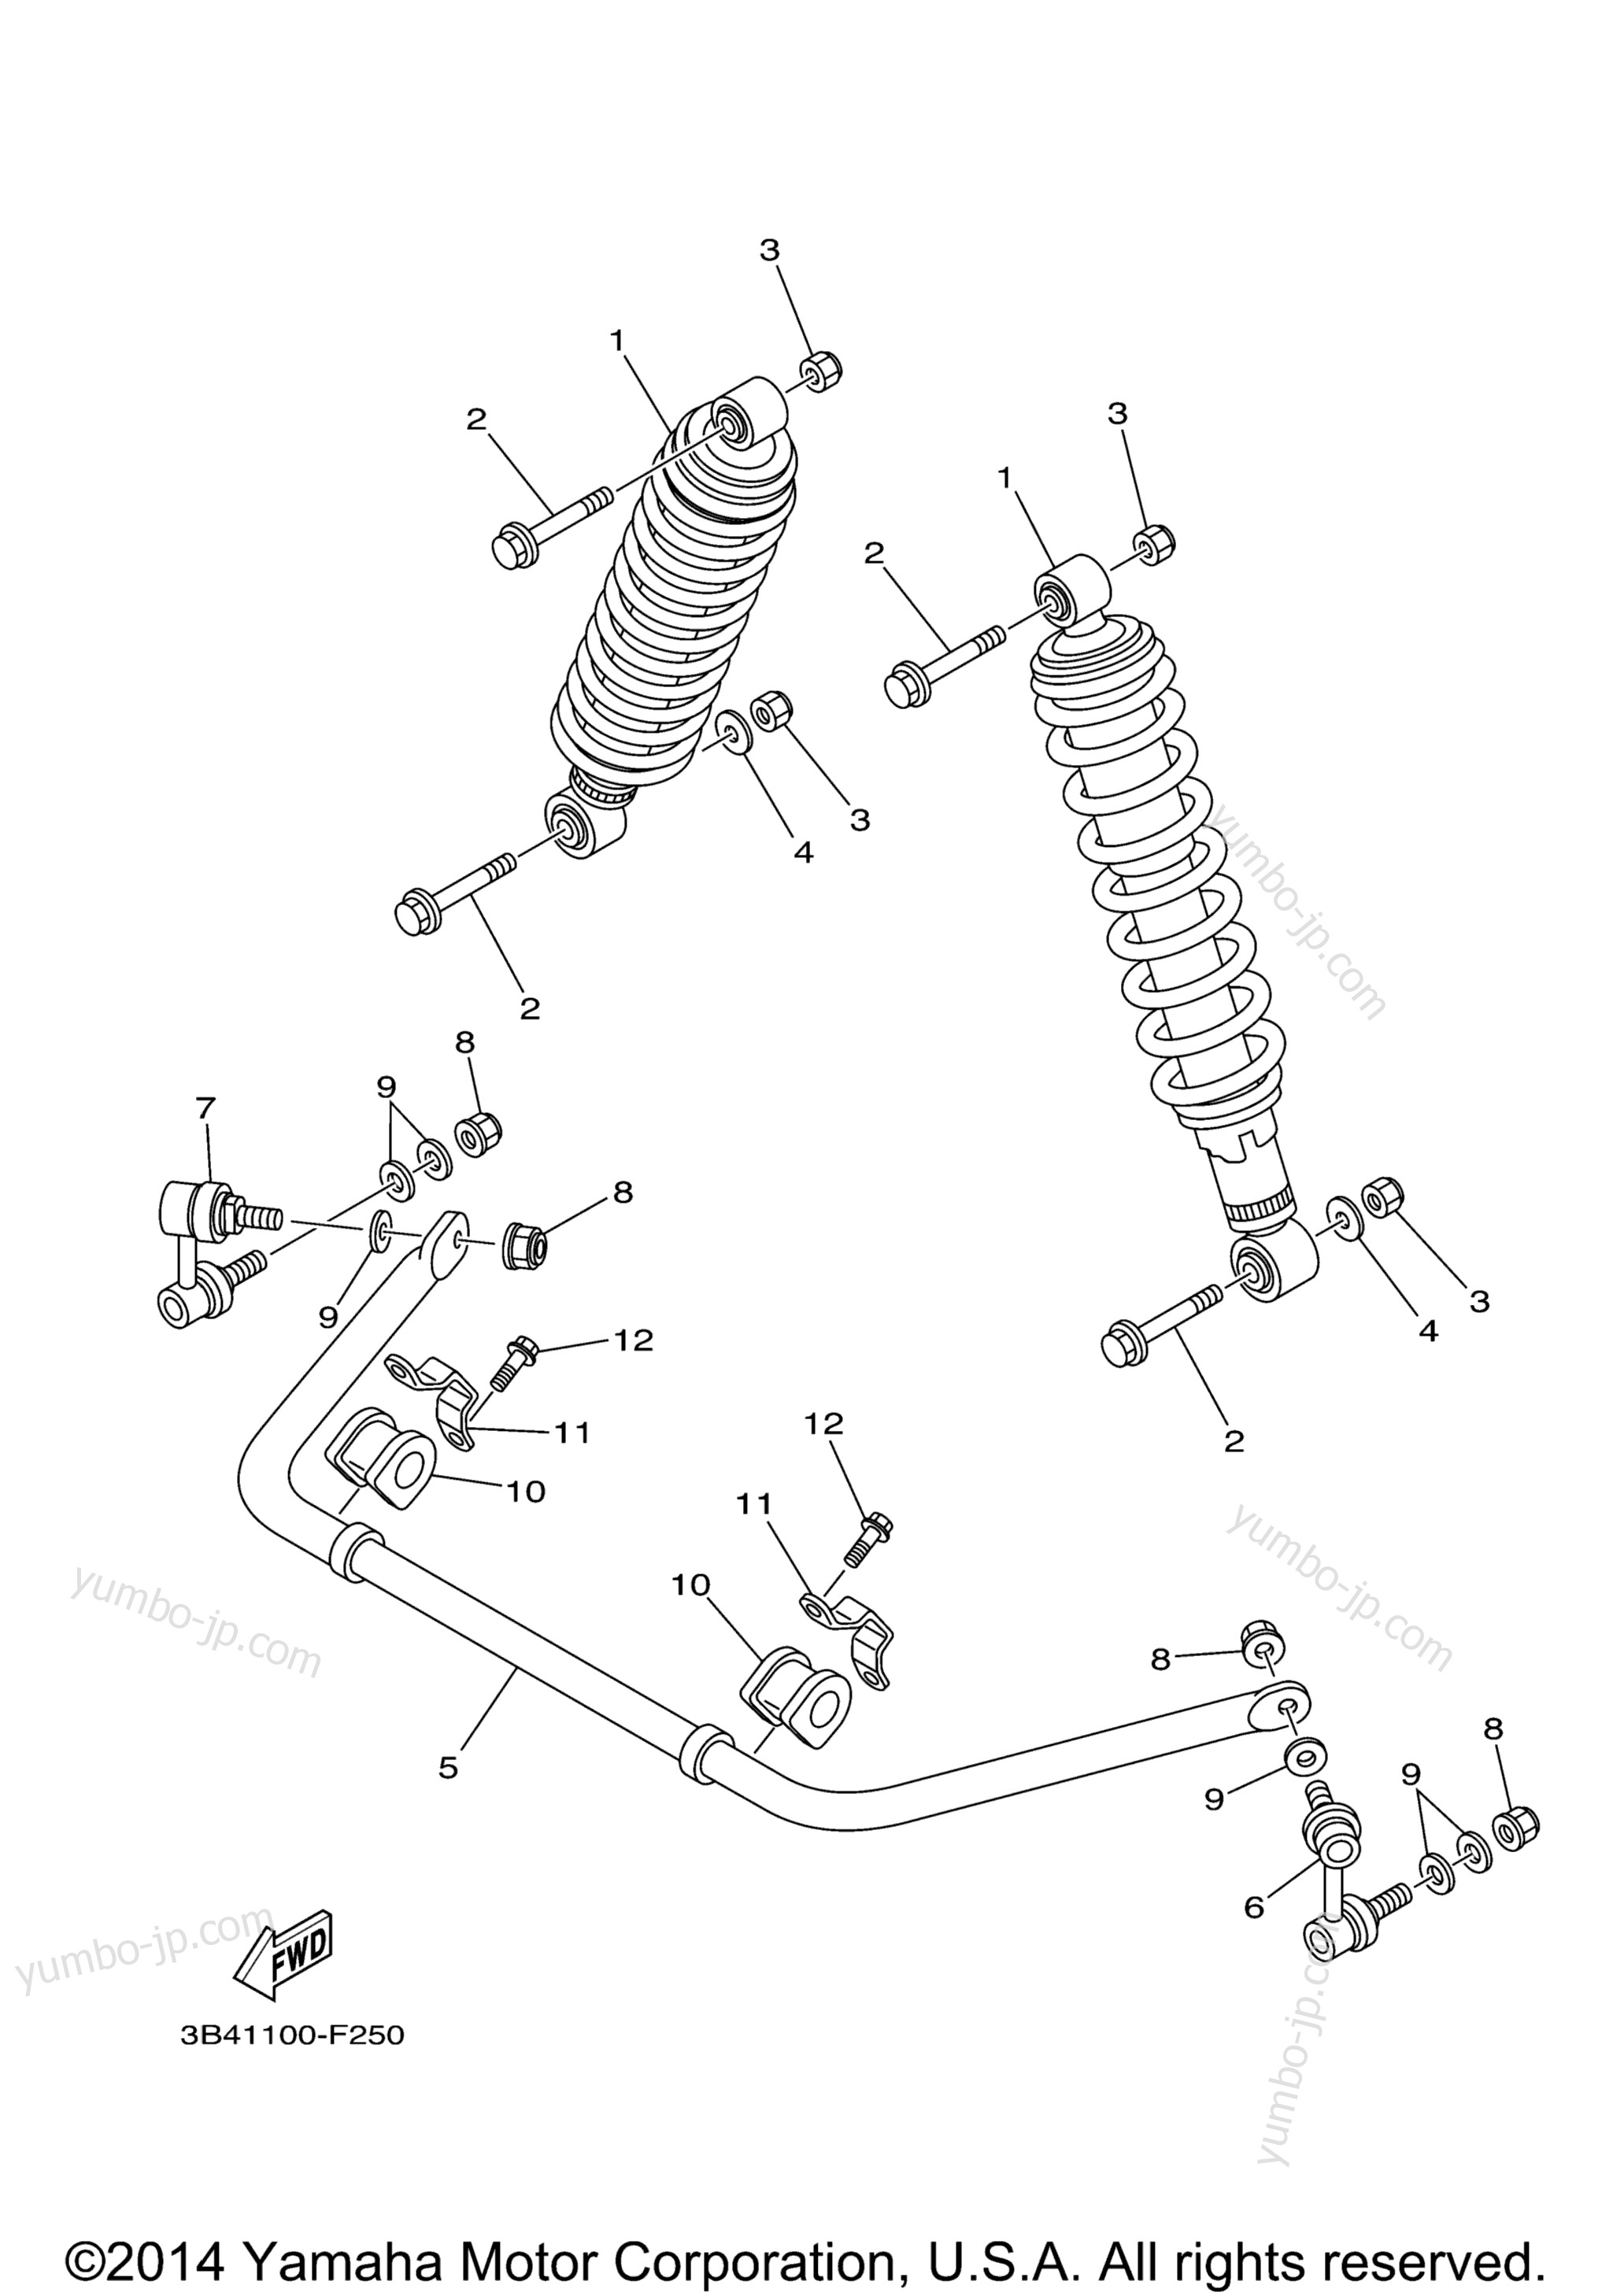 Rear Suspension for ATVs YAMAHA GRIZZLY 550 4WD HUNTER (YFM5FGHA) 2011 year